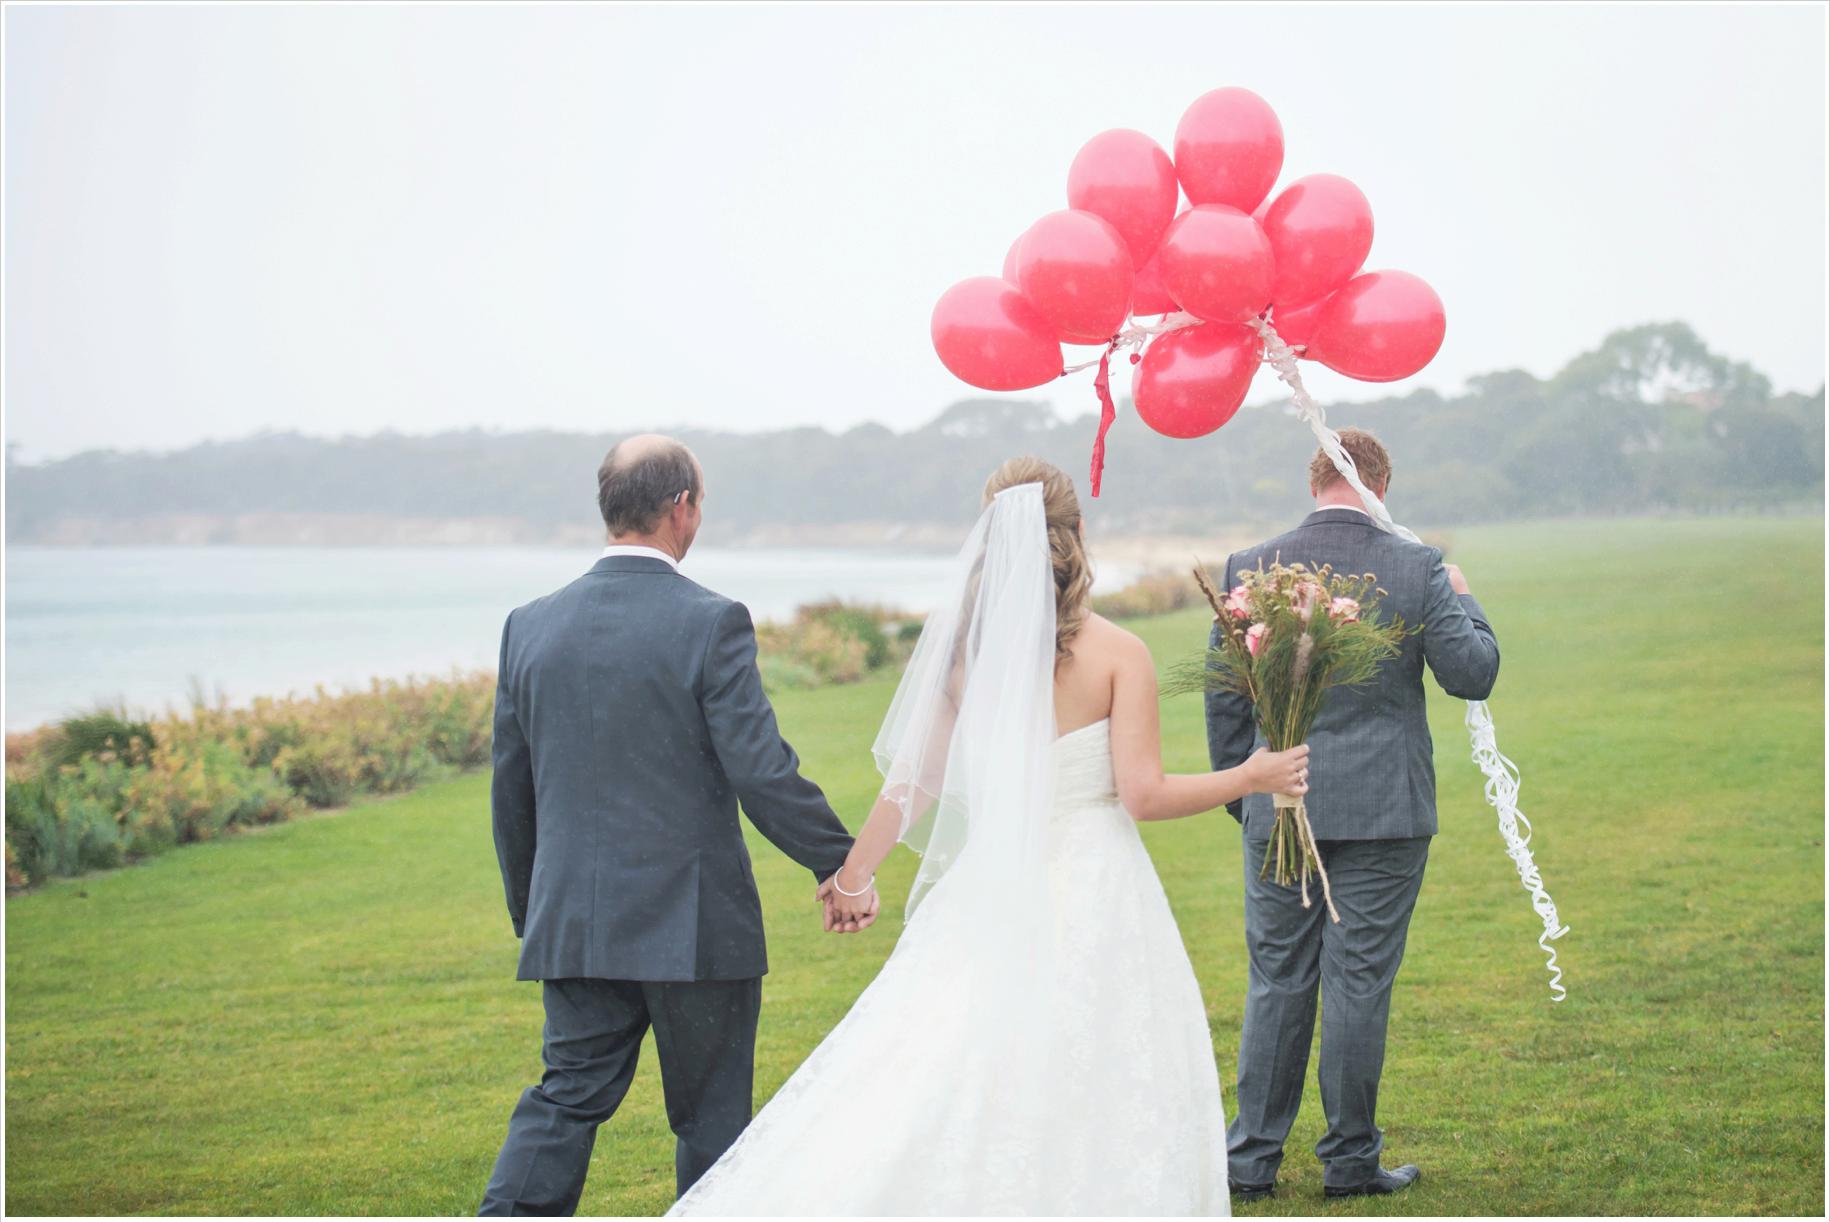 first look in the rain with red balloons